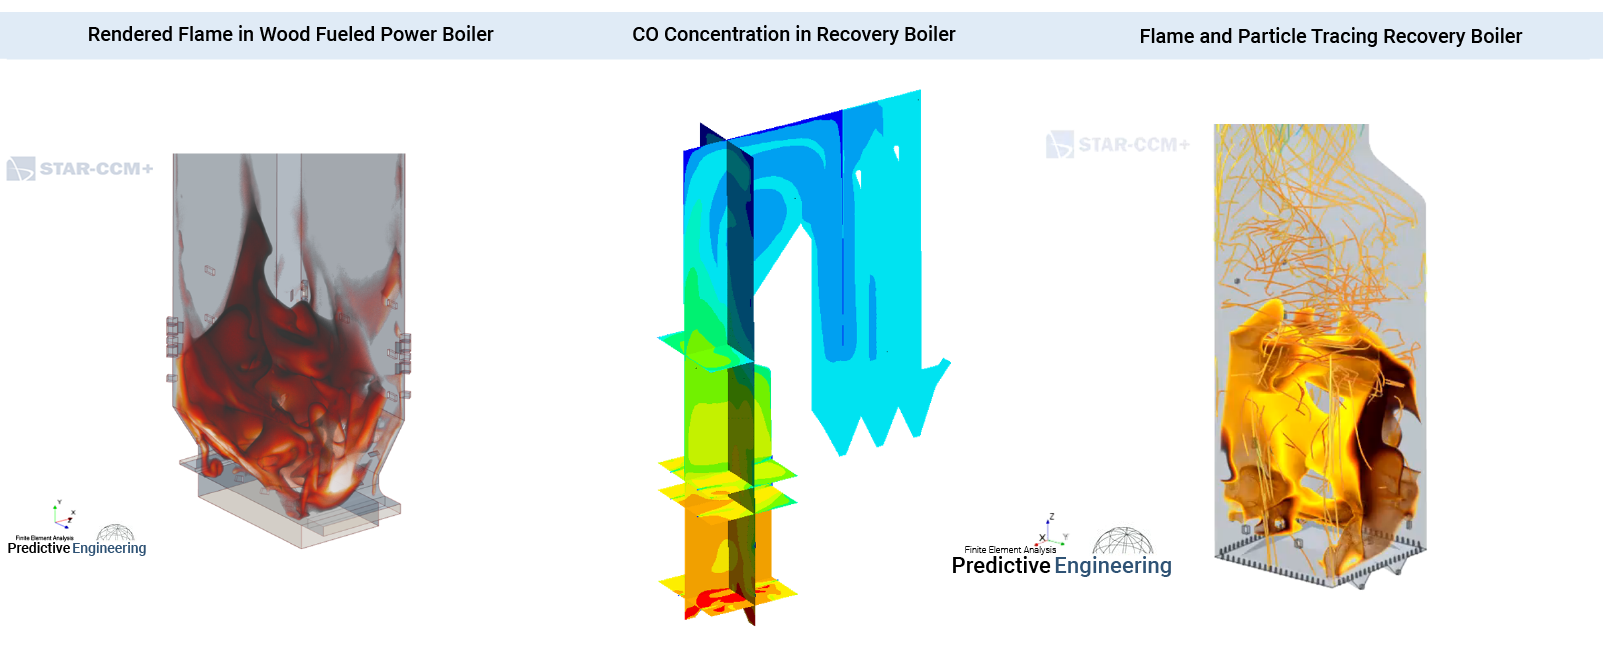 Combustion Boiler Recovery CFD Simulation Ash Content and Particulate Generation - CFD Services